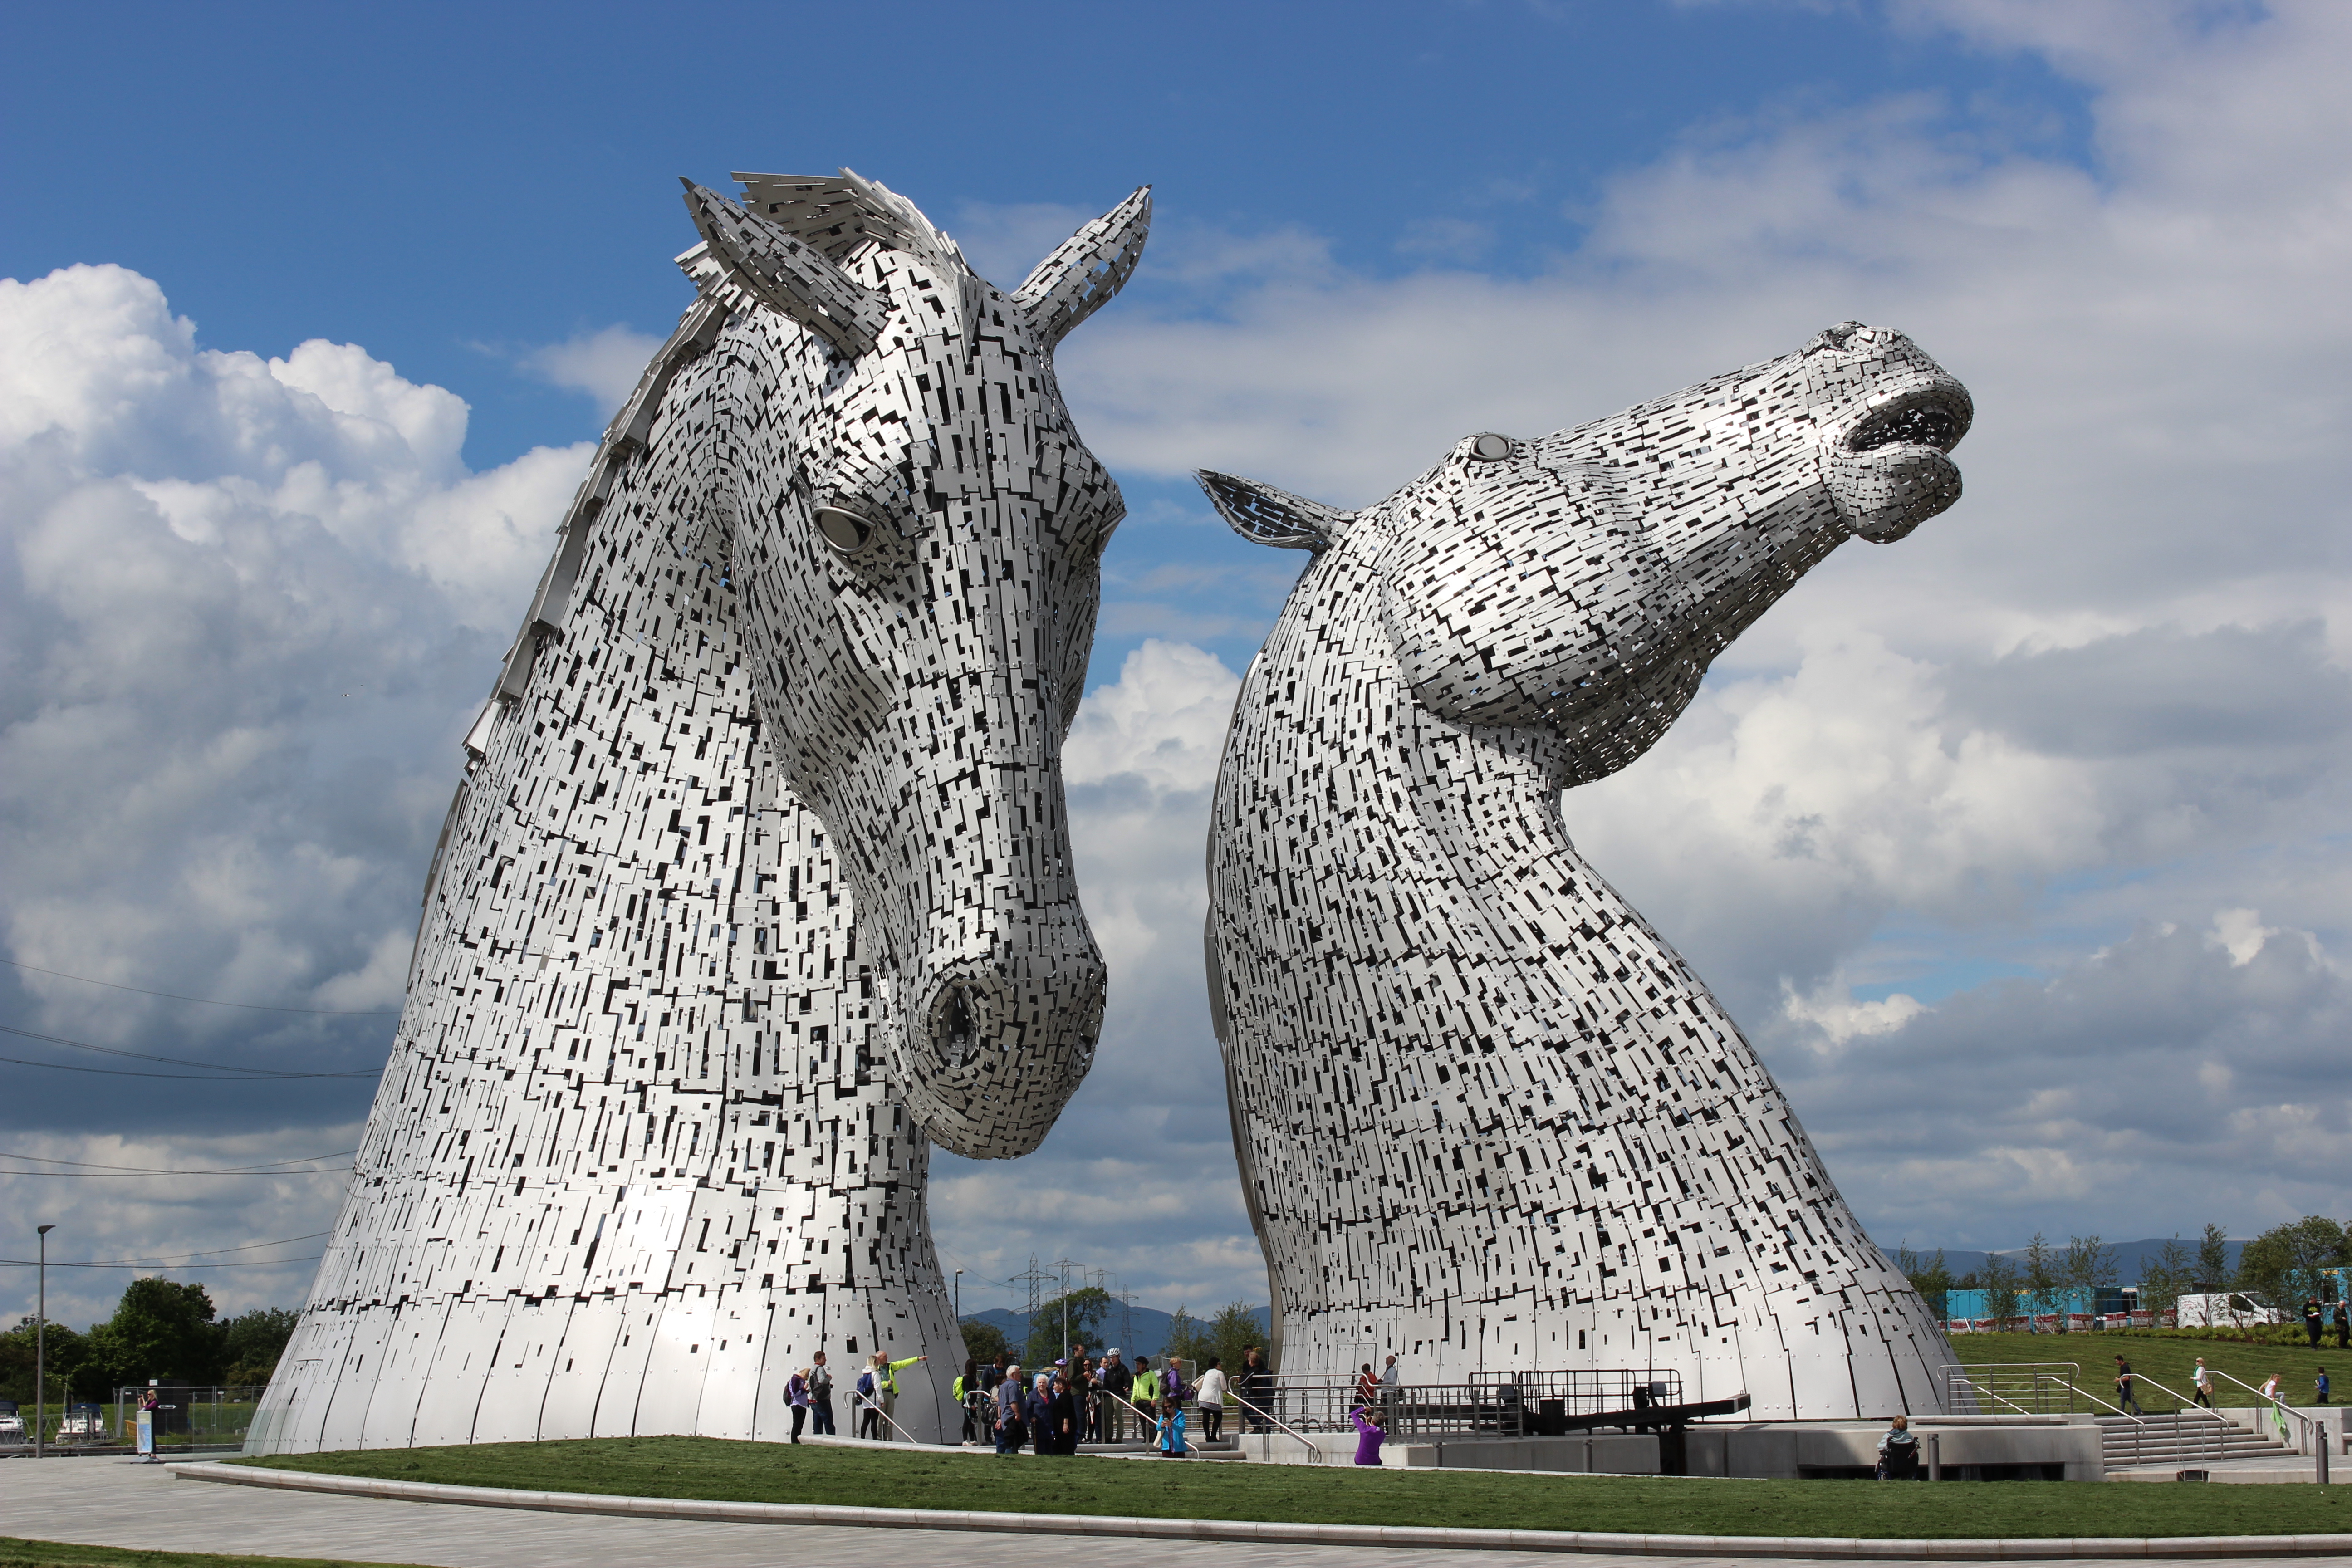 Kelpies are water horses in Scottish folklore. Unlike selkies, their appearances aren't at all welcome. Click here to find out what made them so fearsome.